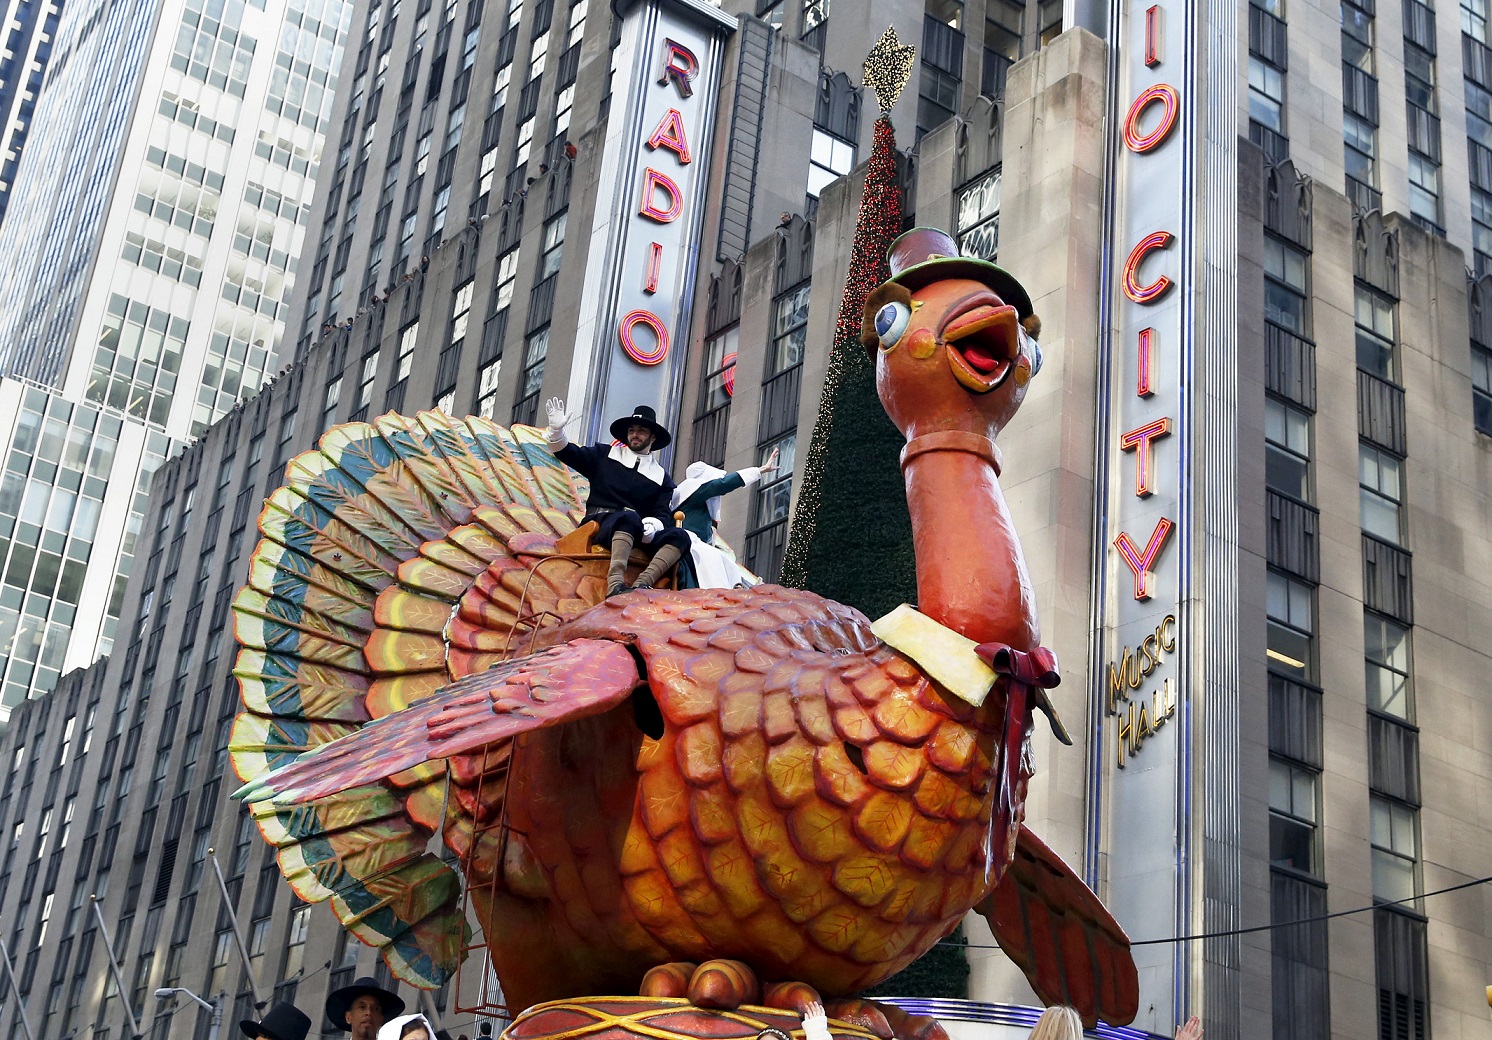 A "Tom Turkey" float makes its way down 6th avenue during the 89th Macy's Thanksgiving Day Parade in the Manhattan borough of New York